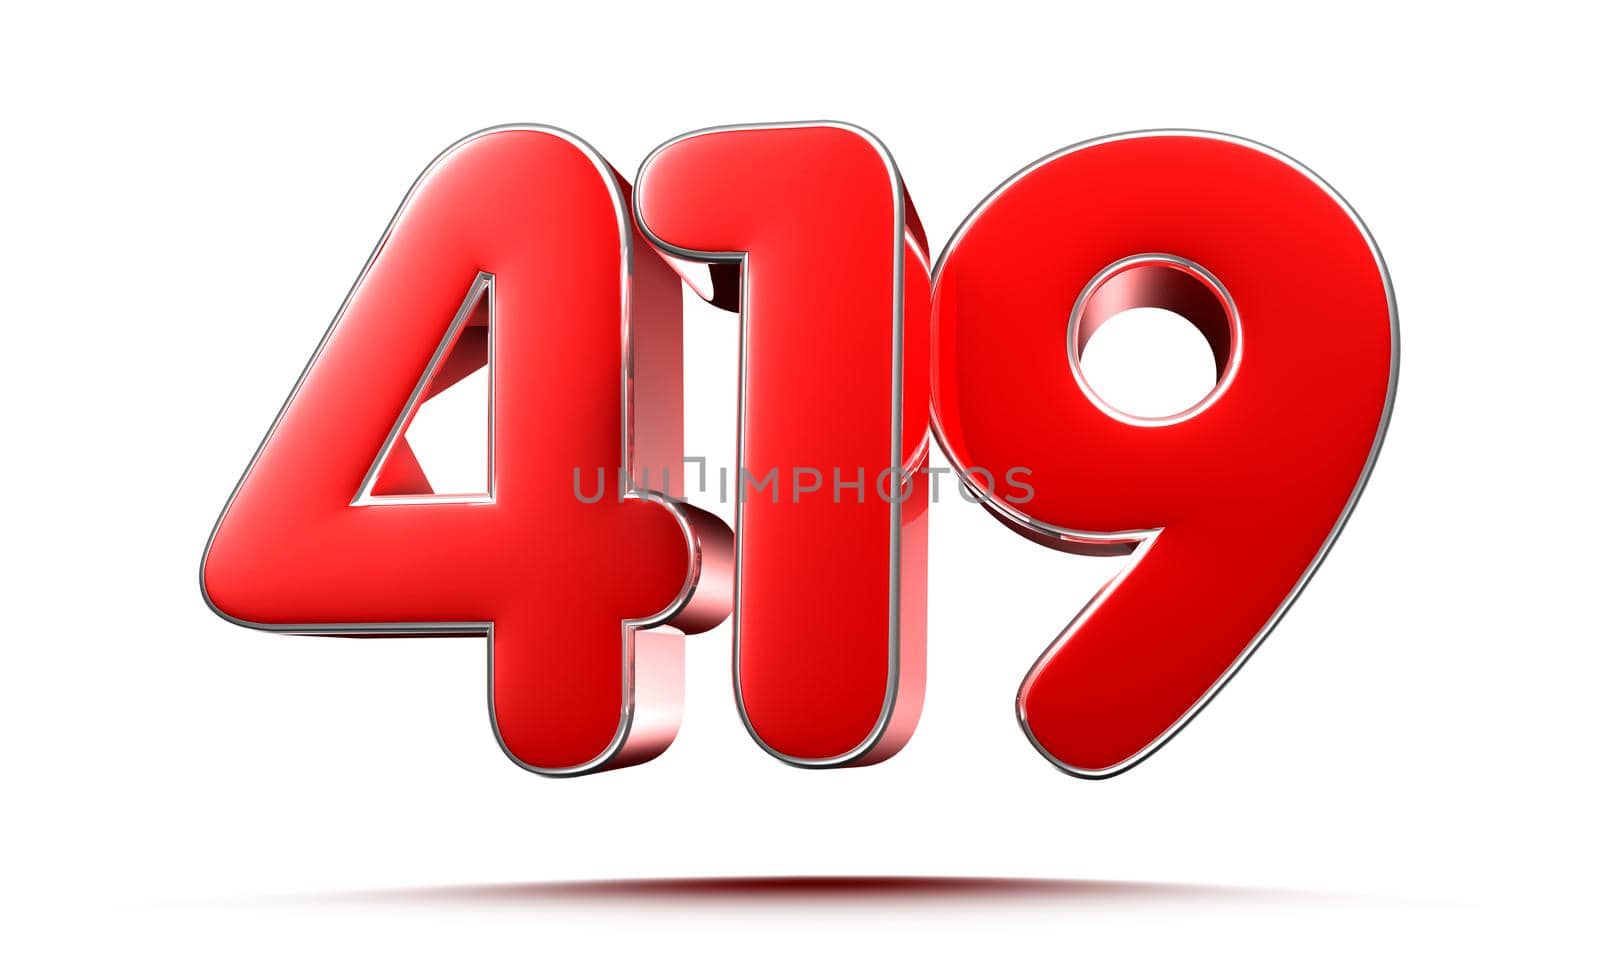 Rounded red numbers 419 on white background 3D illustration with clipping path